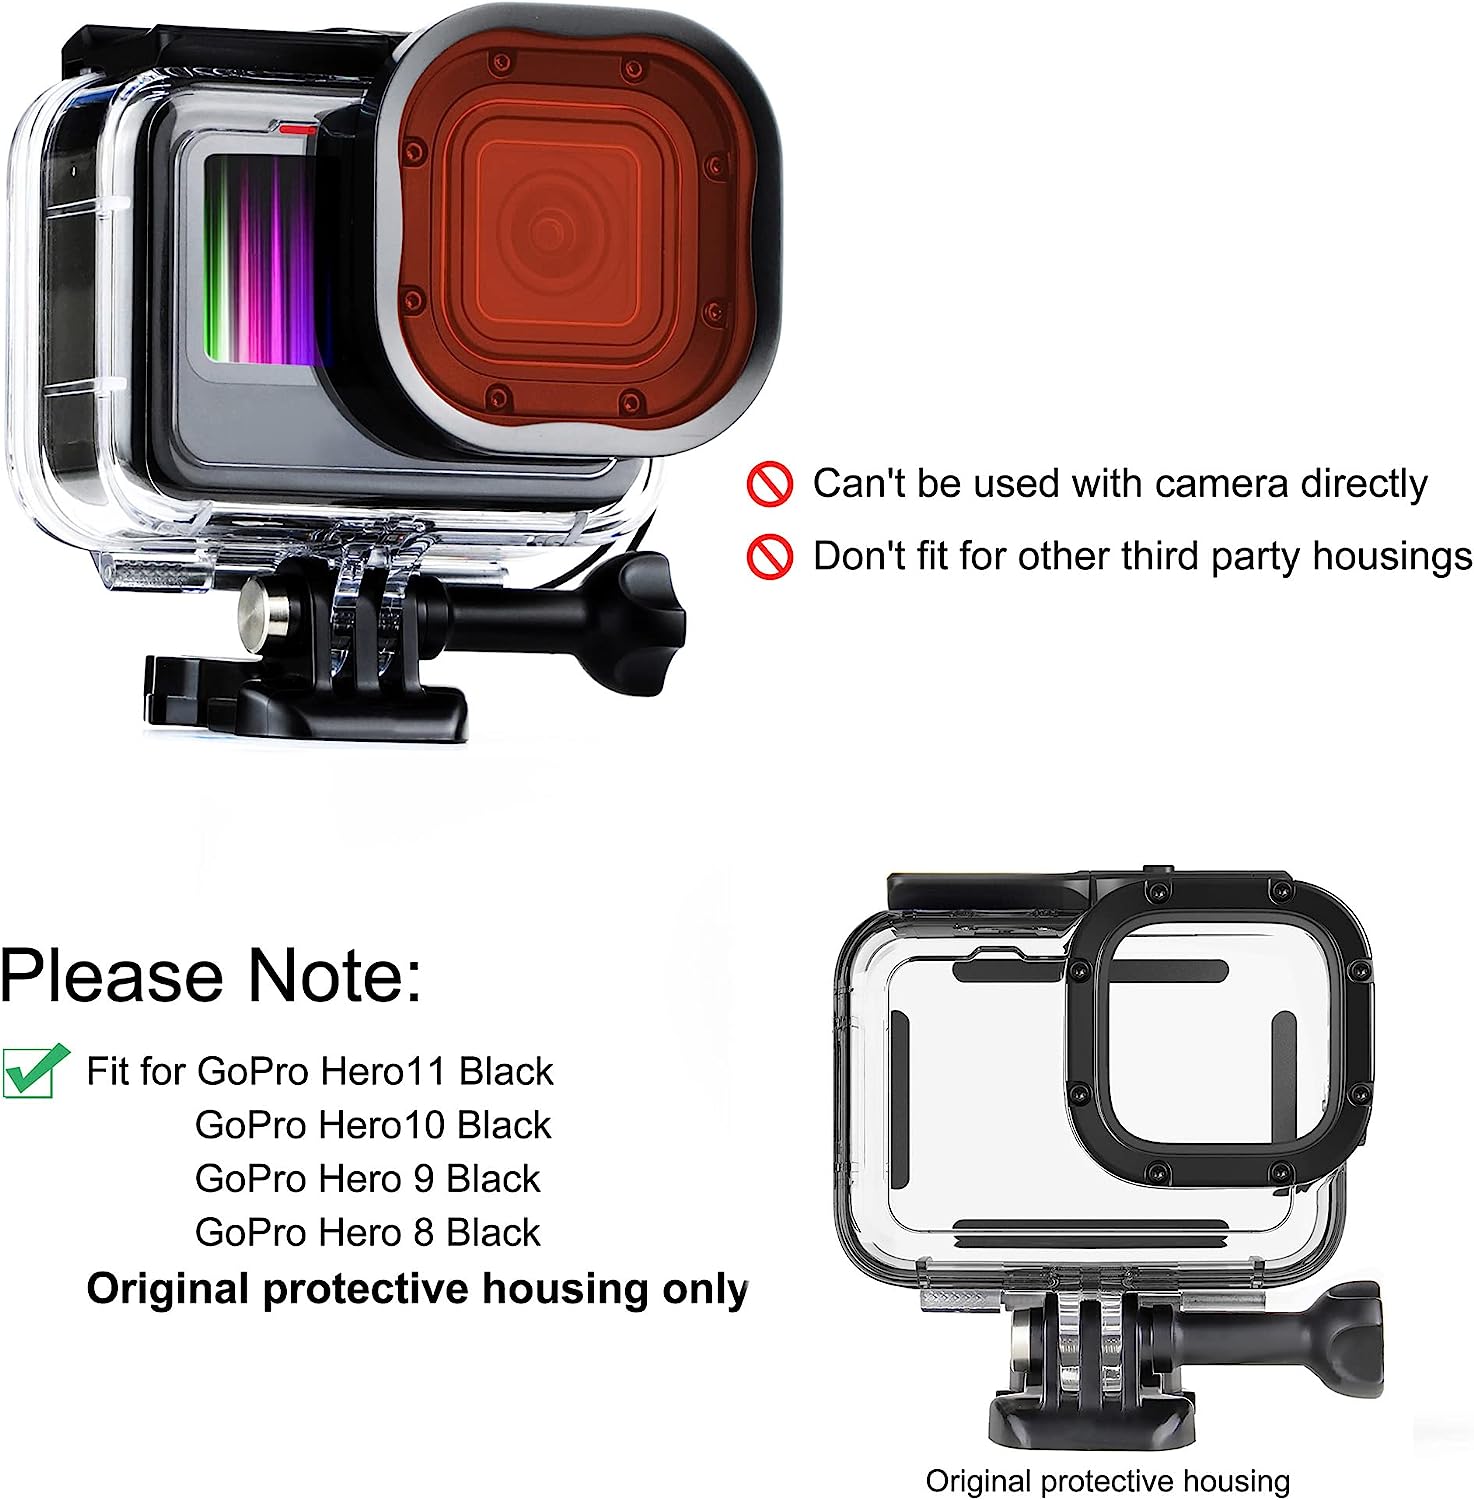 SOONSUN 3 Pack Dive Filter for GoPro Hero 8 9 10 11 Black Official Waterproof Housing Case Red Light Red Magenta Filters Enhances Colors for Various Underwater Video and Photography Conditions